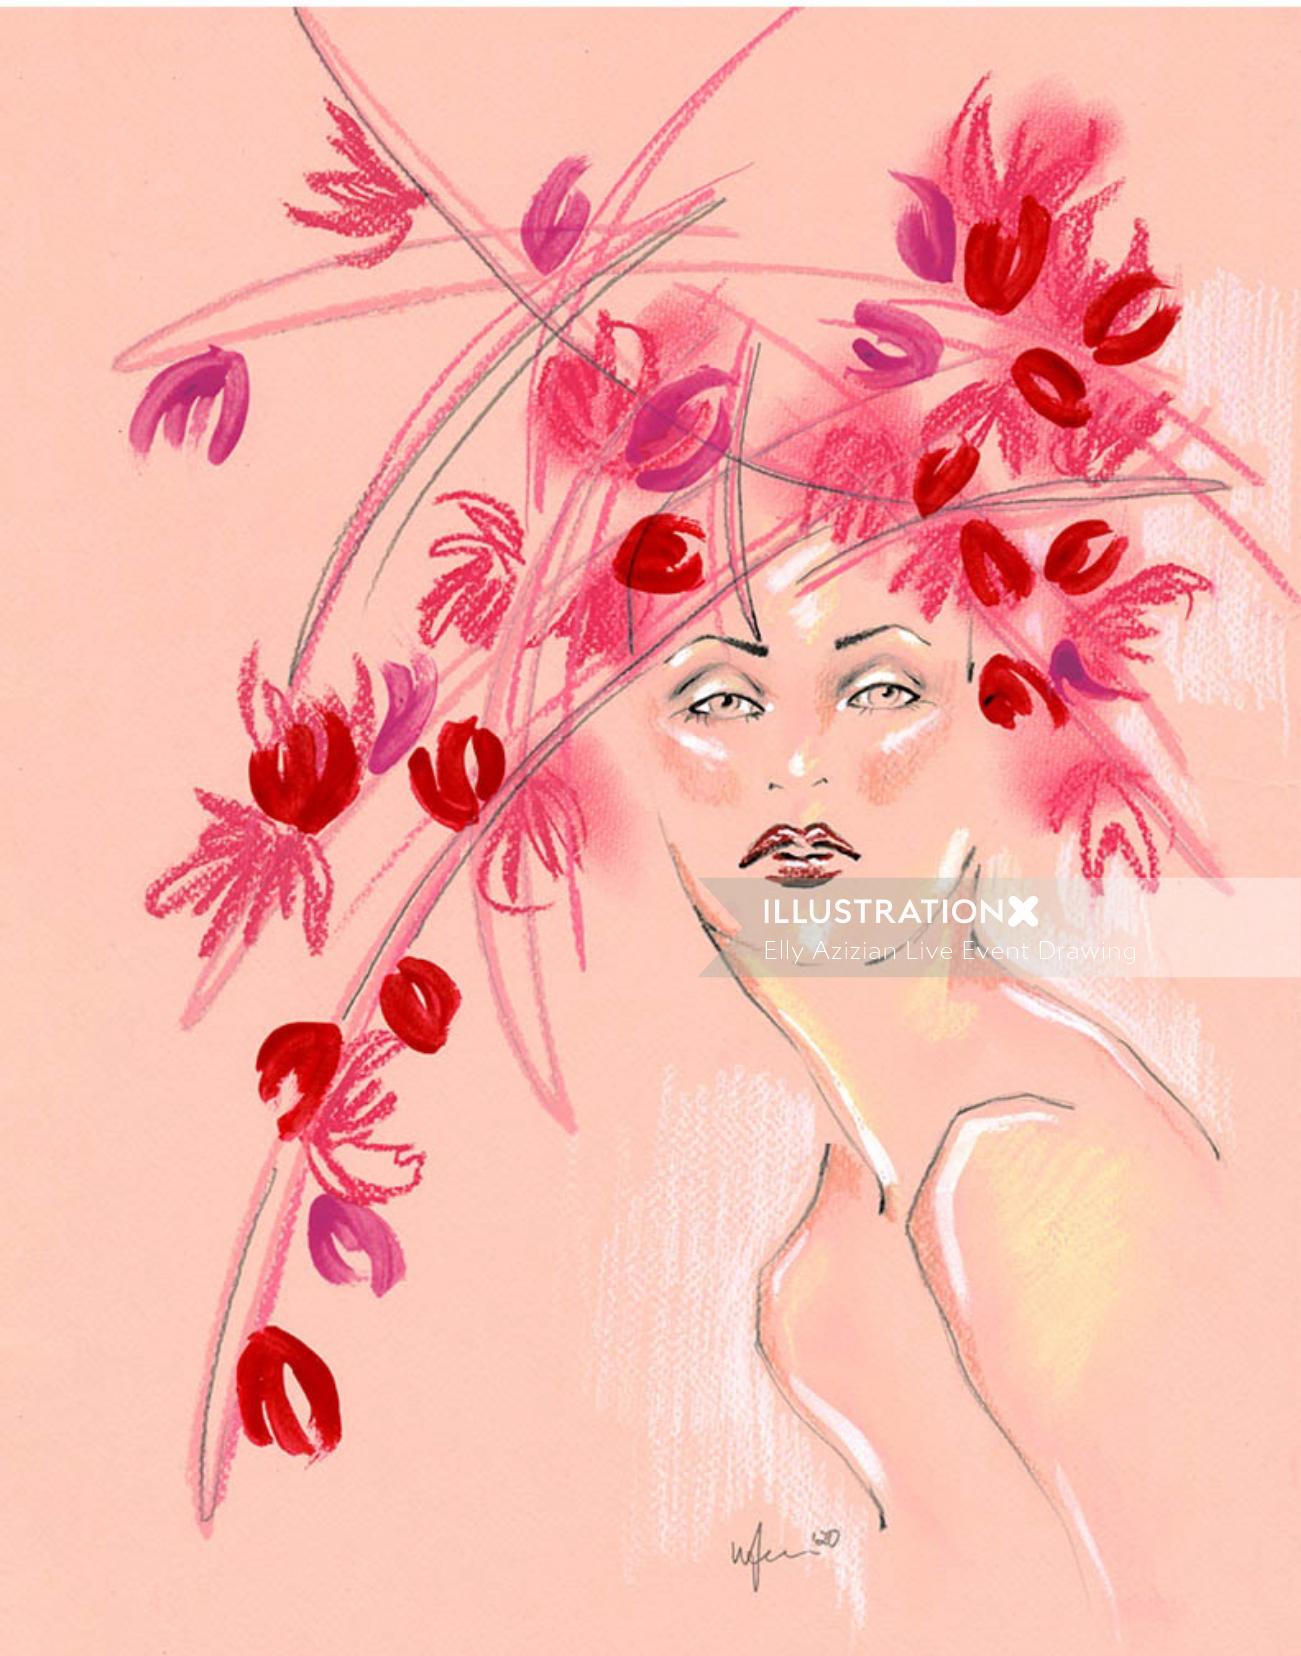 Live Drawing of model with floral hair
